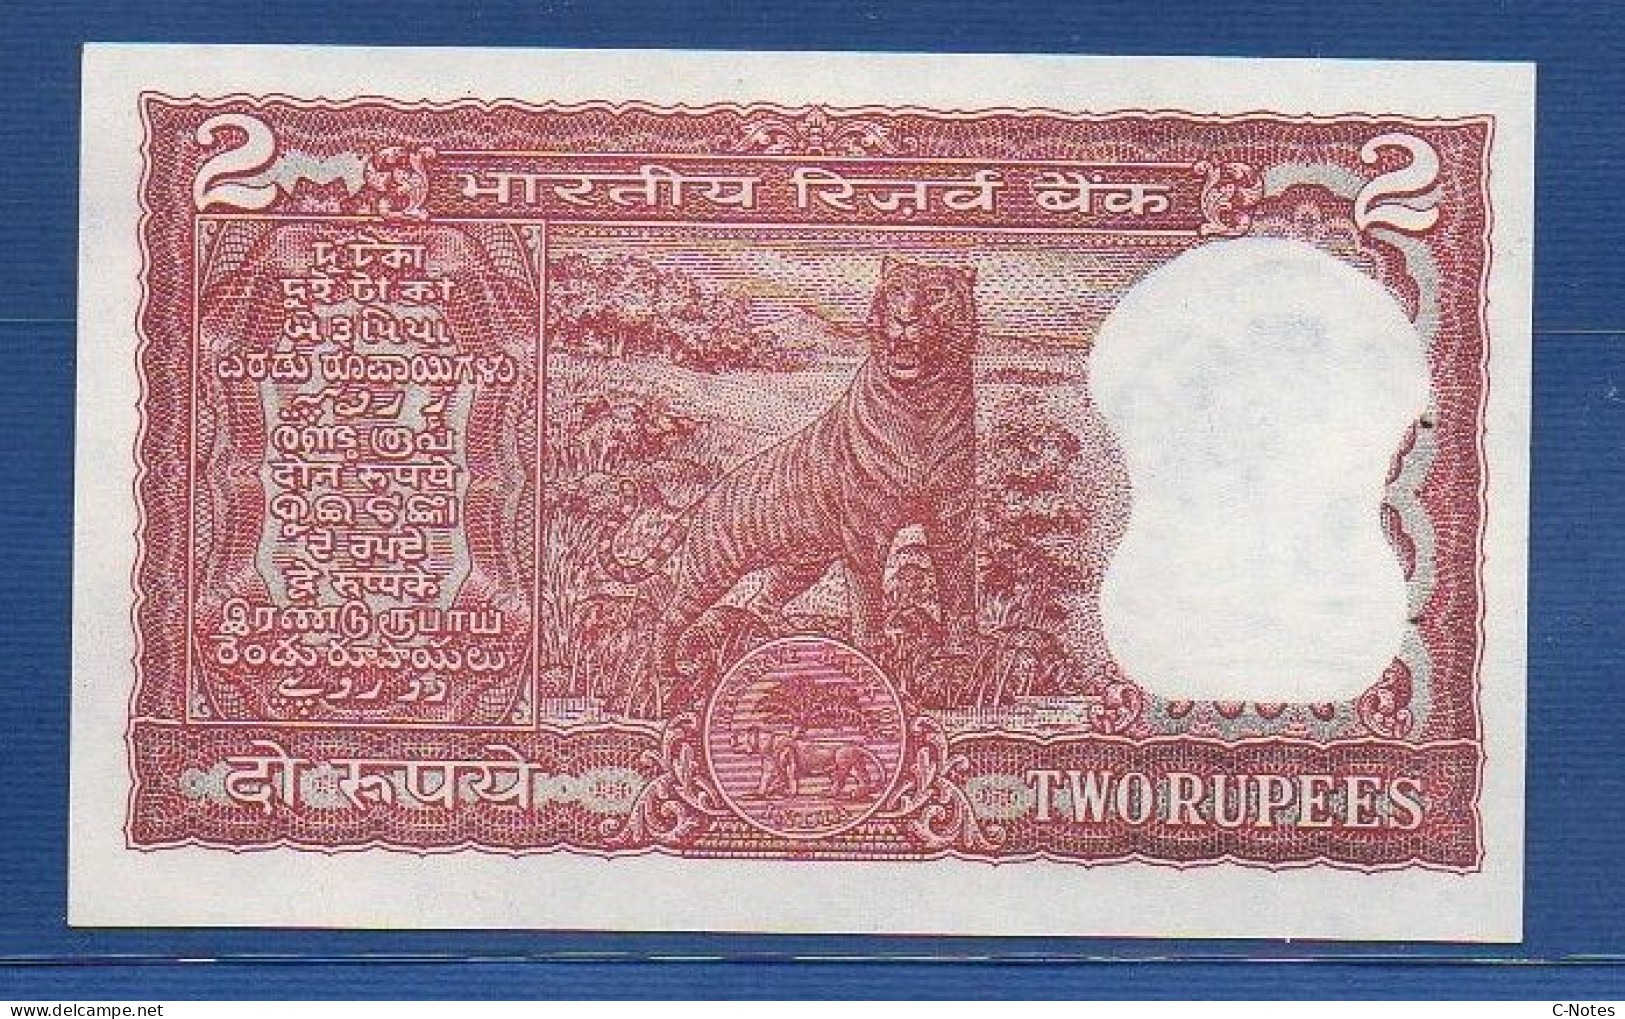 INDIA - P. 53f – 2 Rupees ND, UNC,  Serie G4 708953 - Plate Letter C Signature: I. G. Patel (1977-1982) - Inde